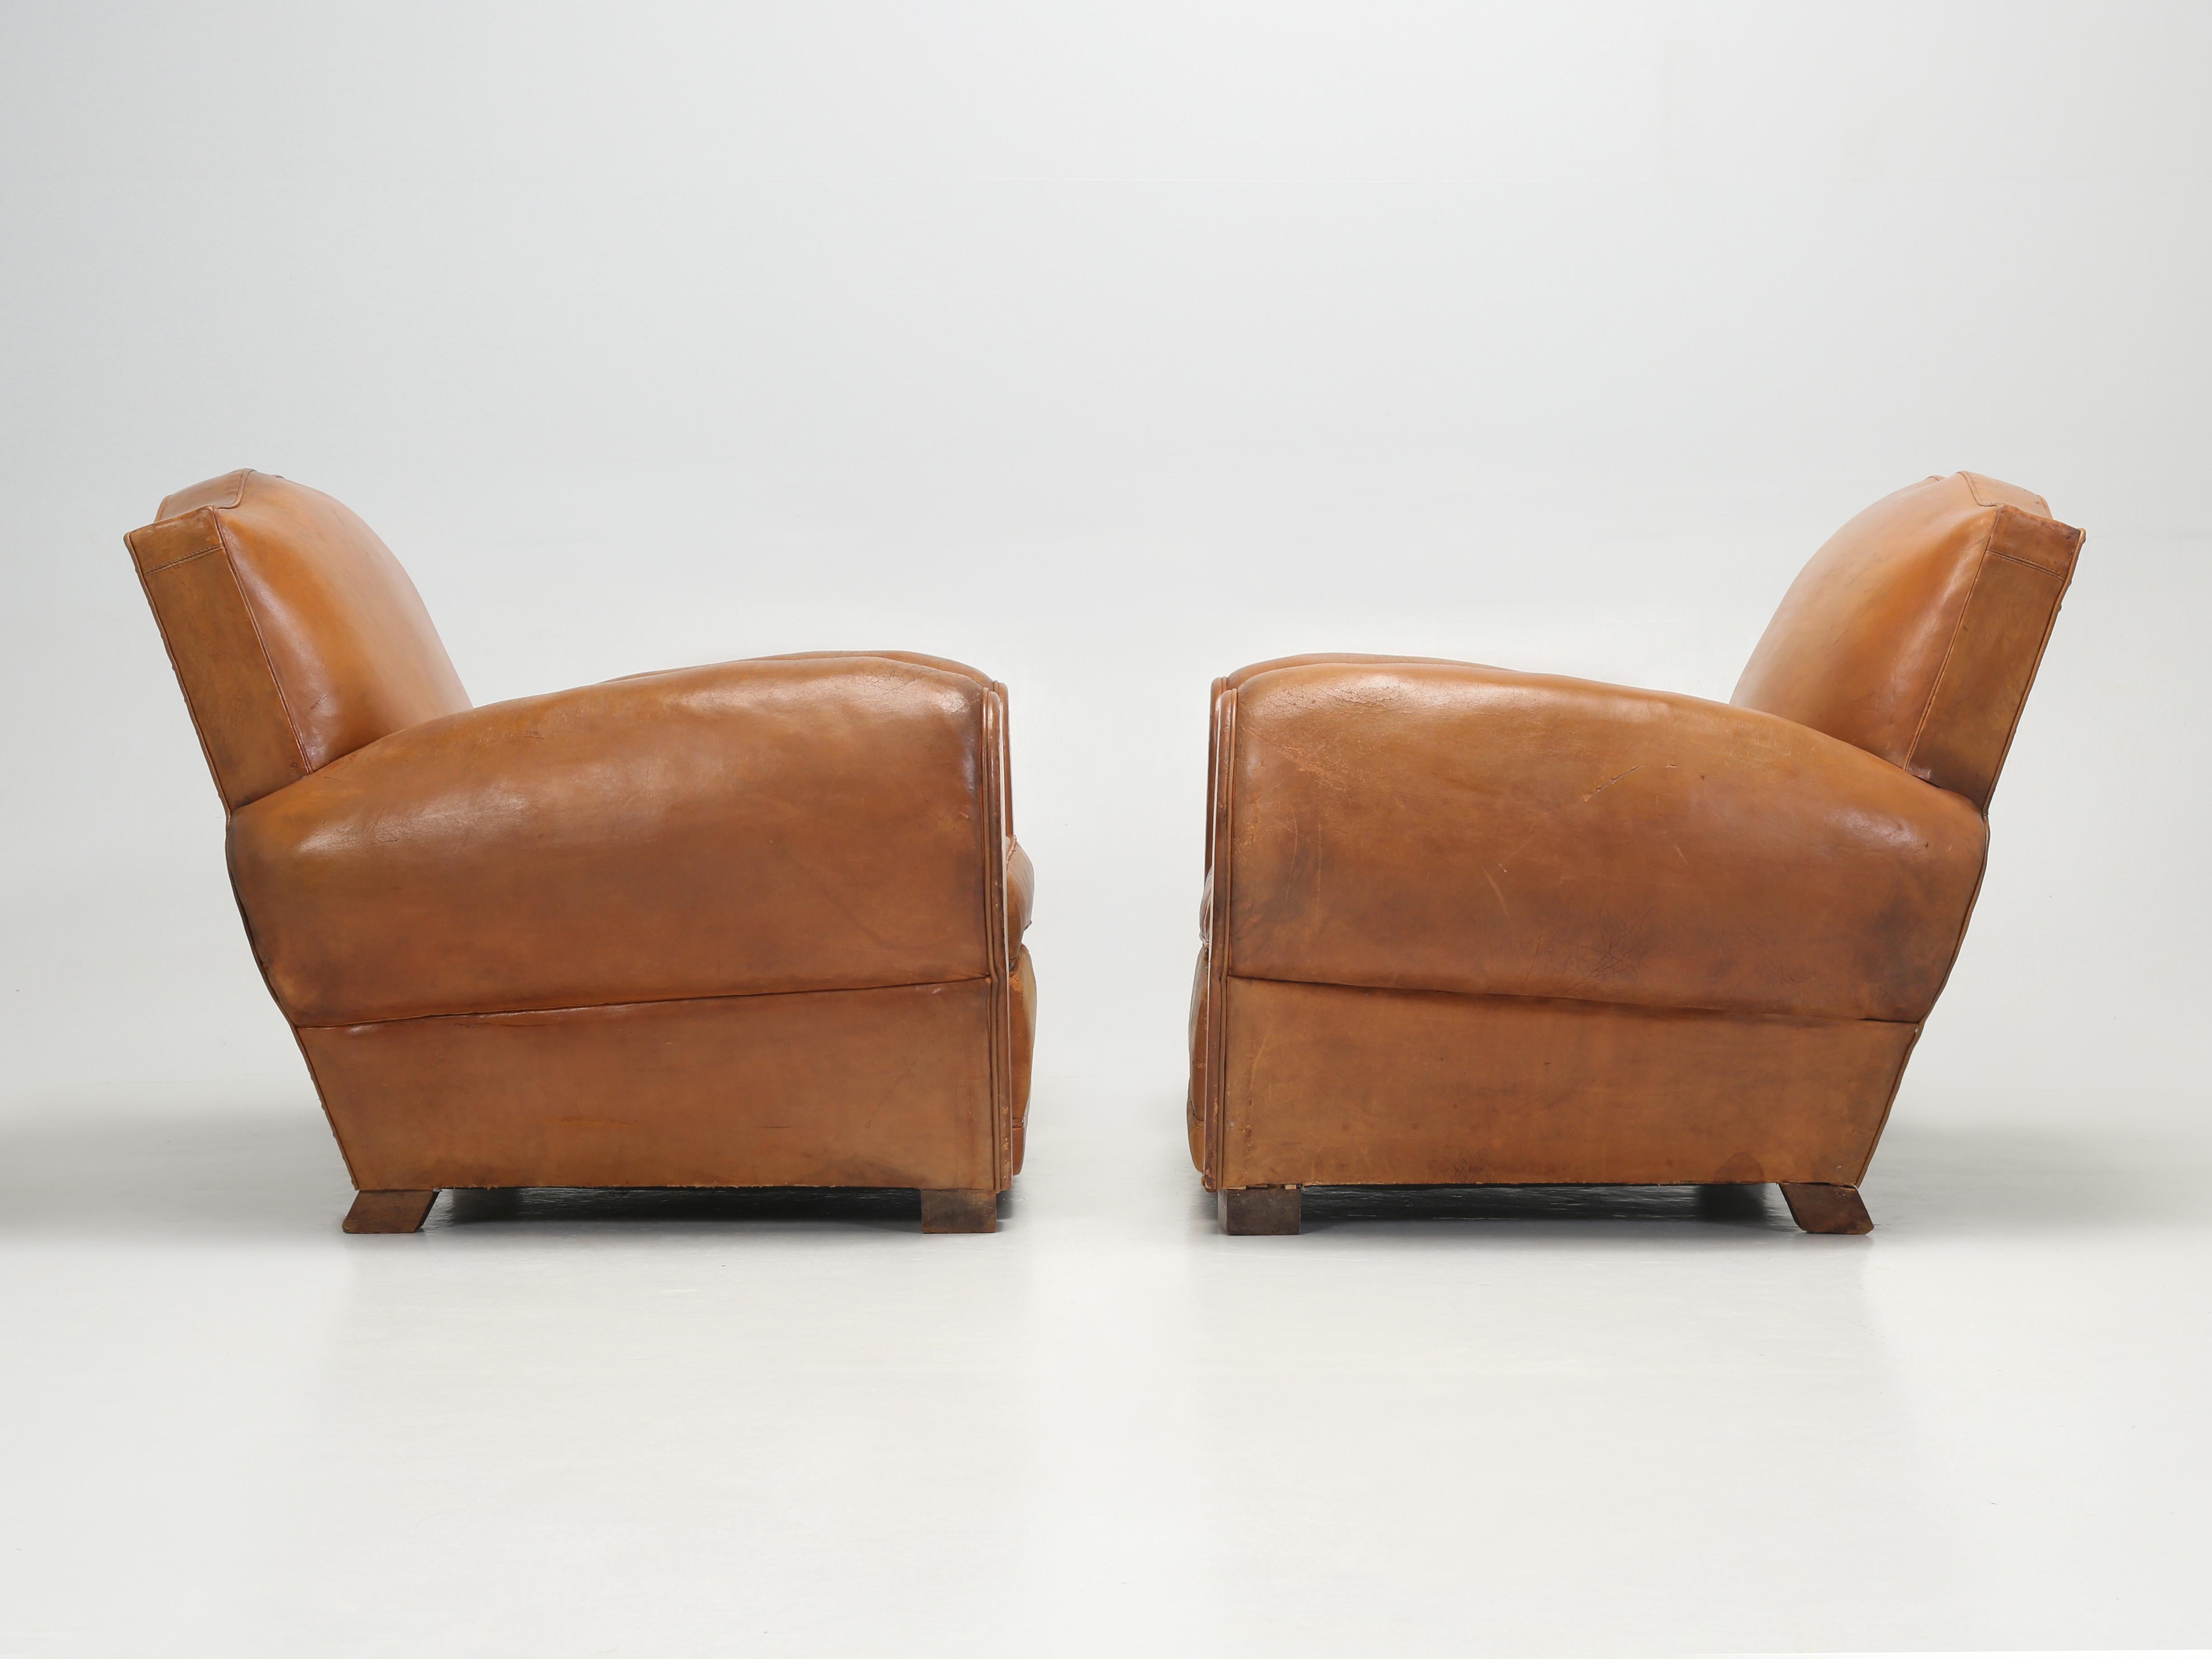 French Art Deco Moustache Original Leather Club Chairs Restored Inside, c1930s  12